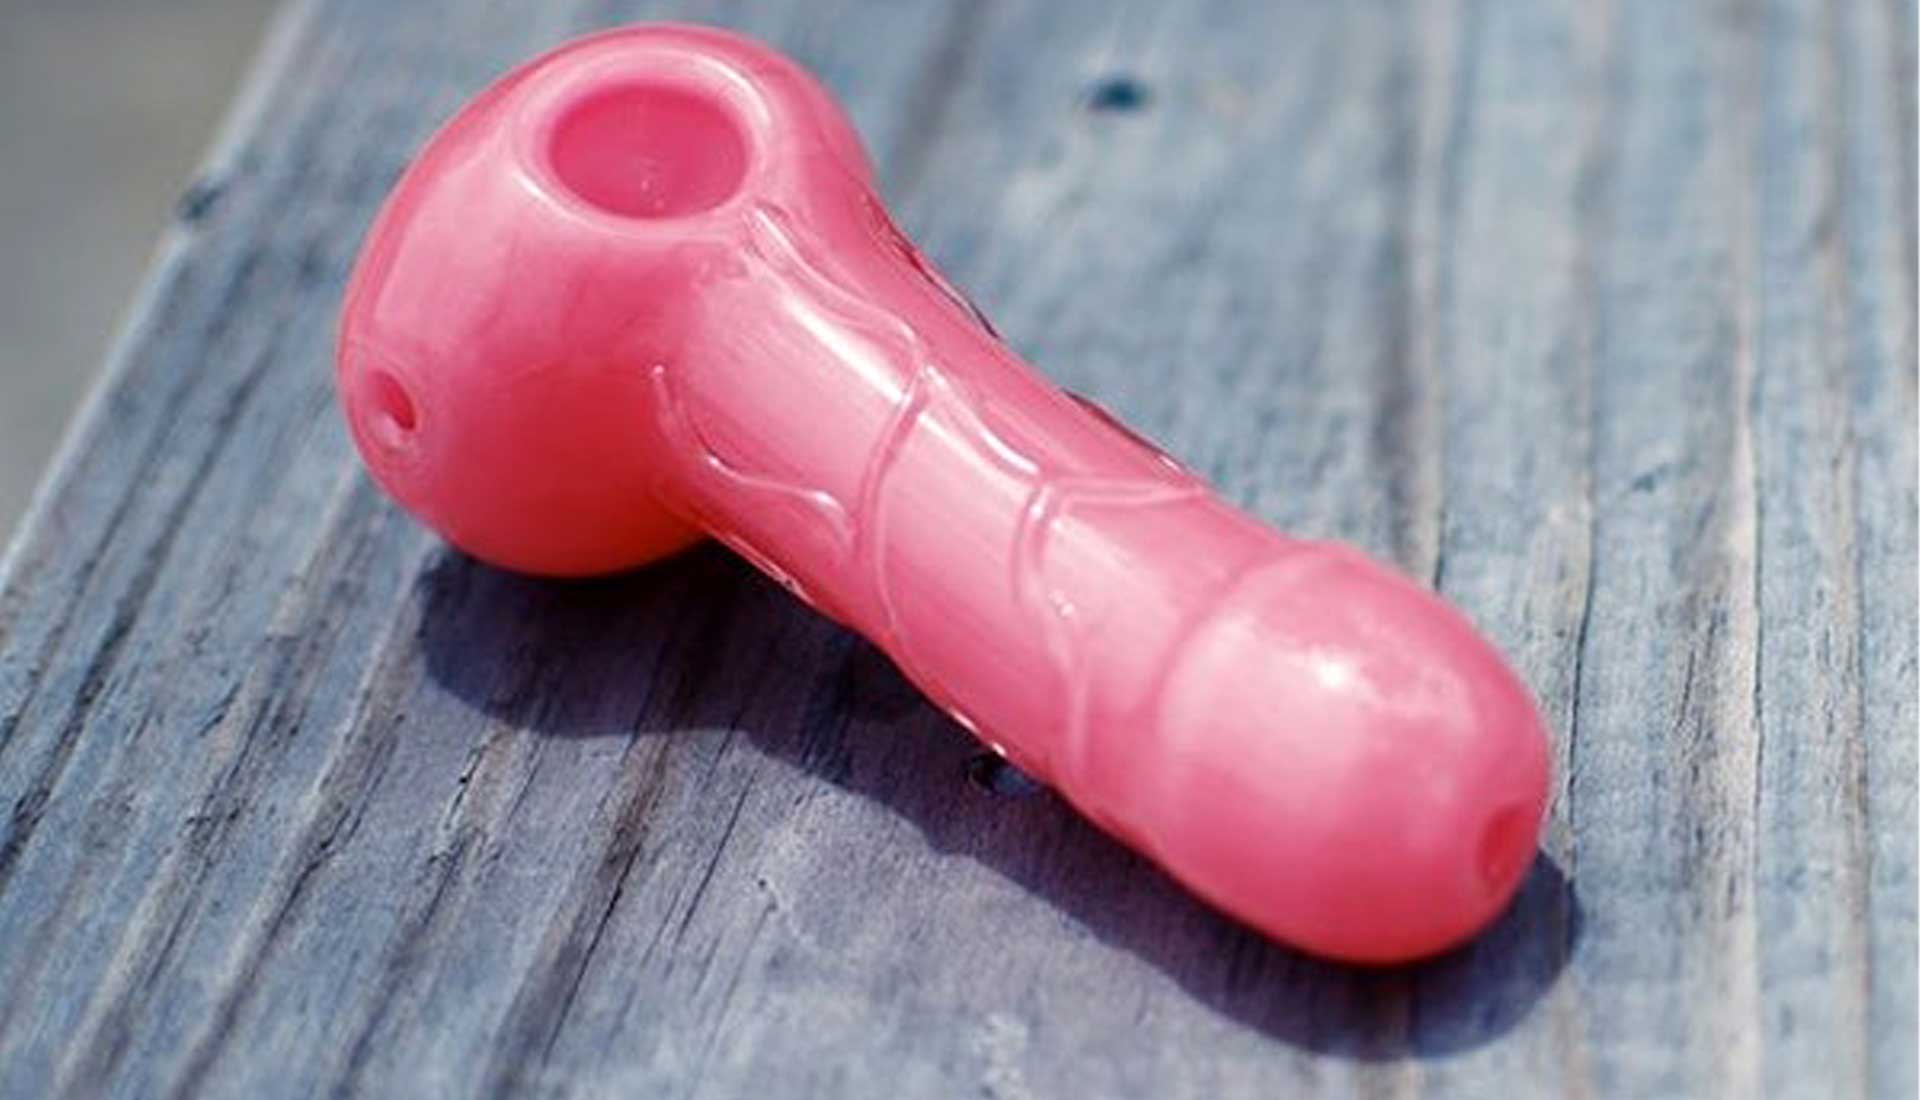 penis-pipe-featured-image